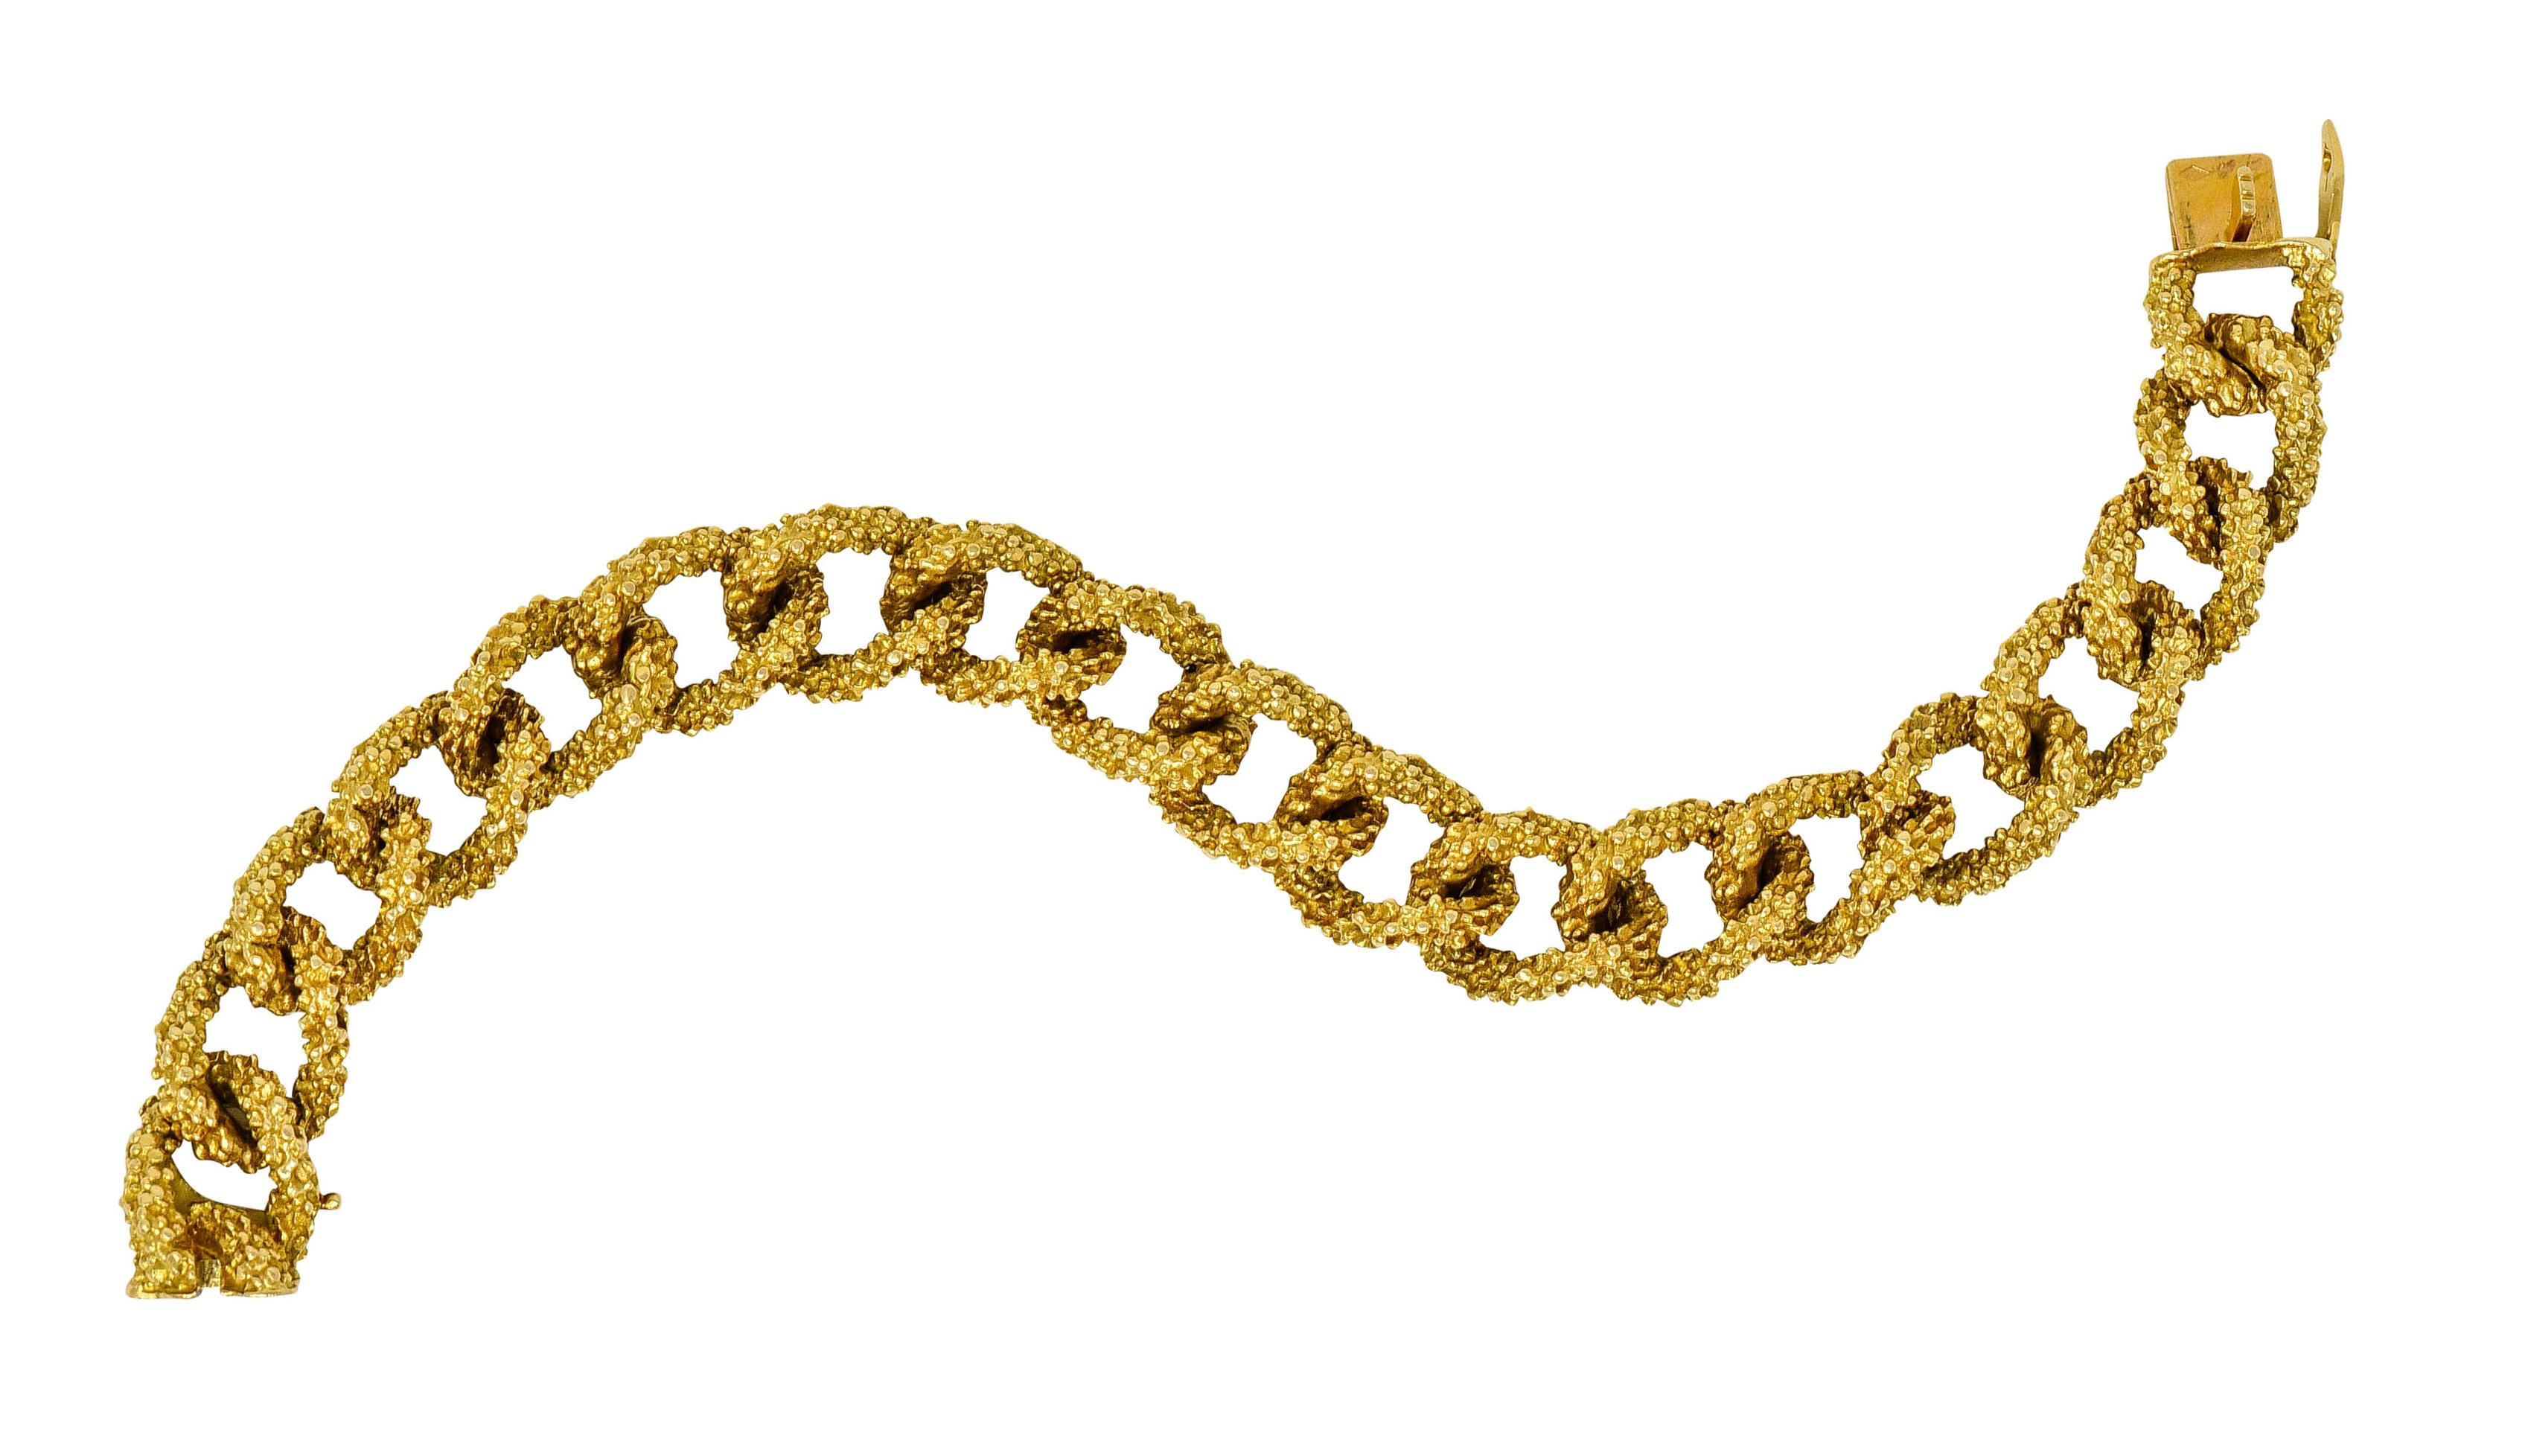 Bracelet is comprised of oversized curb links

Featuring a highly textured nugget finish

Completed by a concealed clasp and hinged safety

Fully signed Boucheron Paris with maker's mark

French assay marks for 18 karat gold

Circa: 1960s

Length: 7